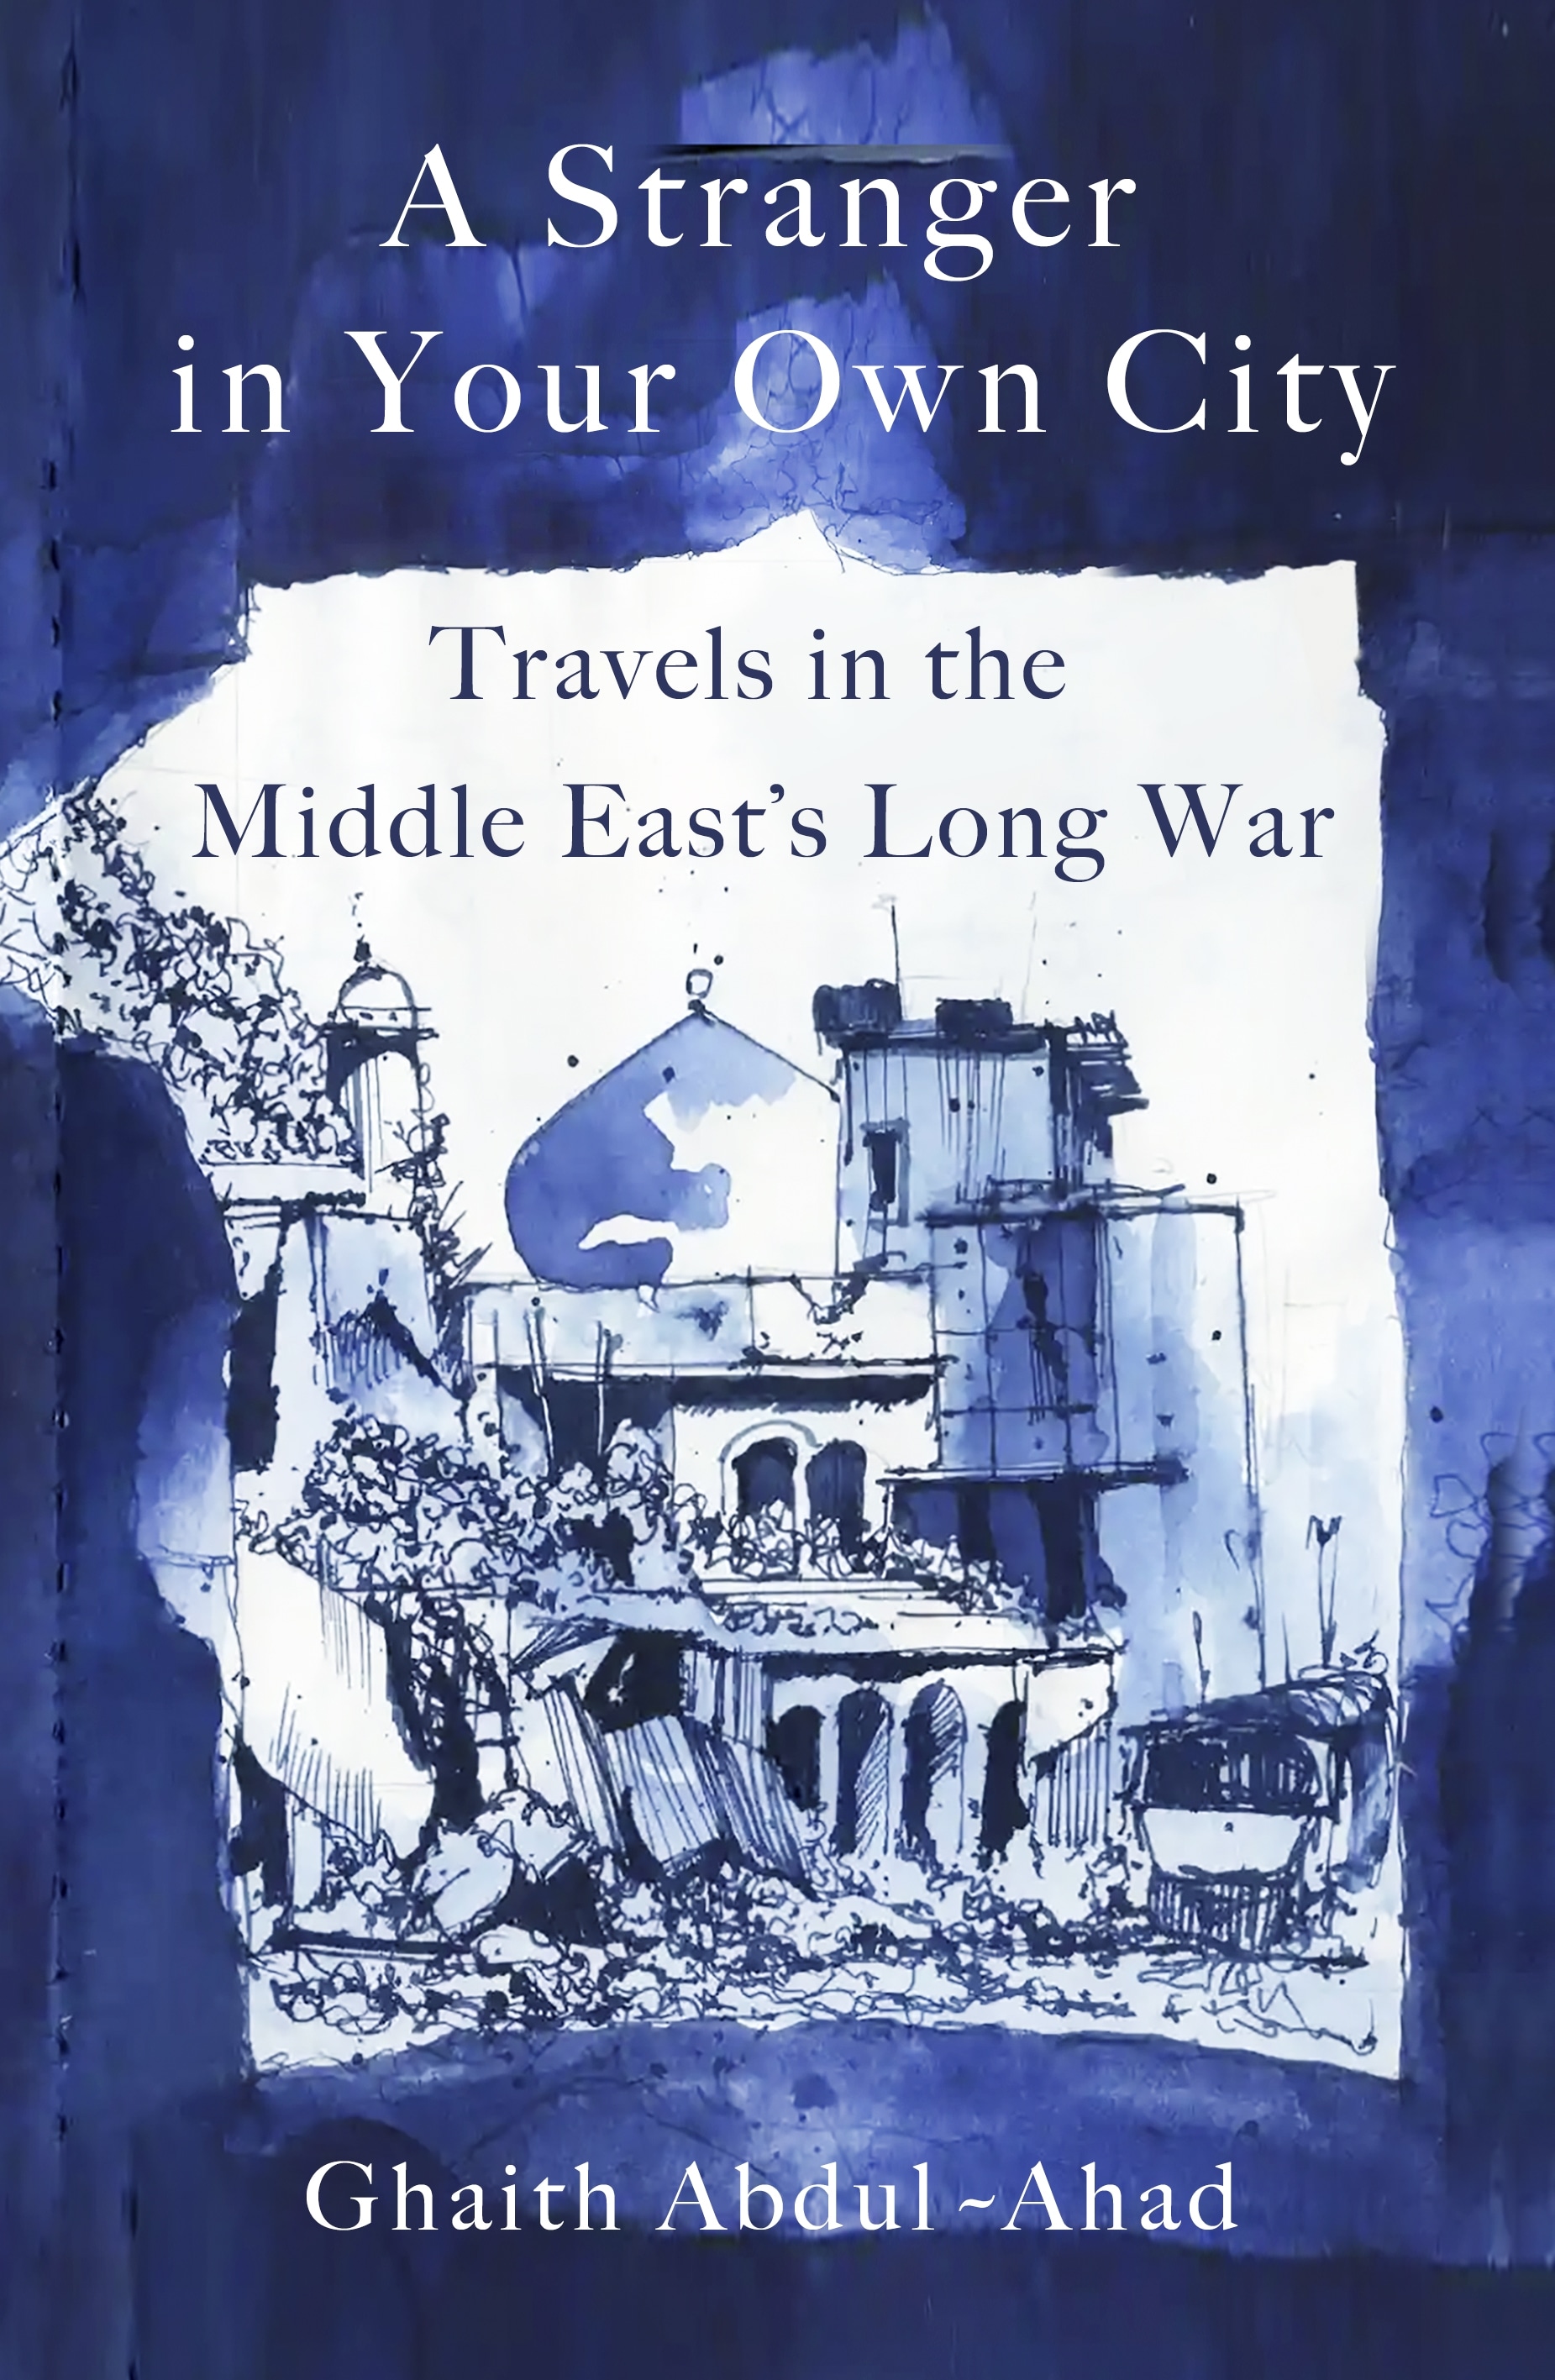 Book “A Stranger in Your Own City” by Ghaith Abdul-Ahad — March 2, 2023